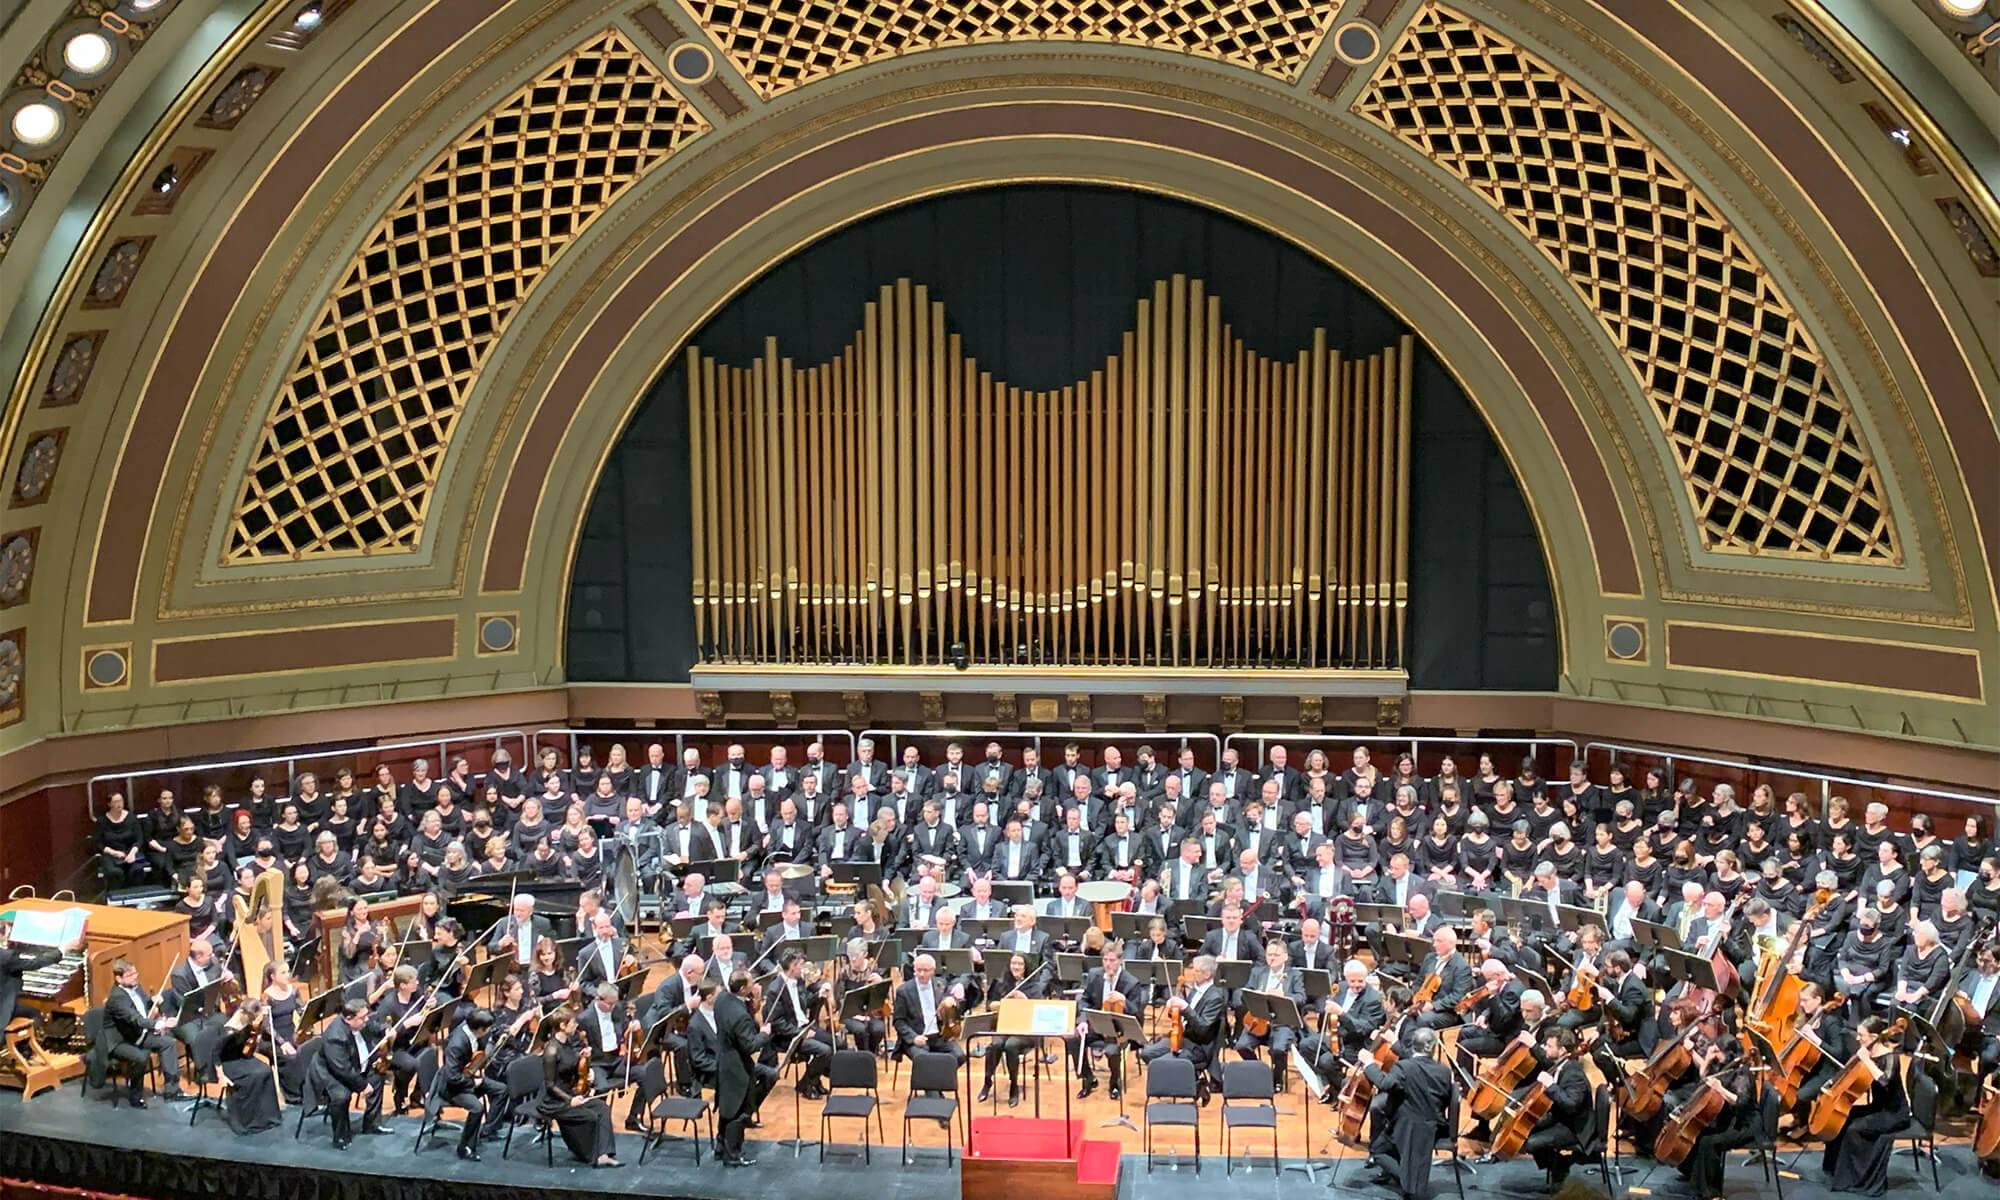 The University Musical Society Choral Union on stage at Hill Auditorium in Ann Arbor with the BRNO Philharmonic Orchestra.